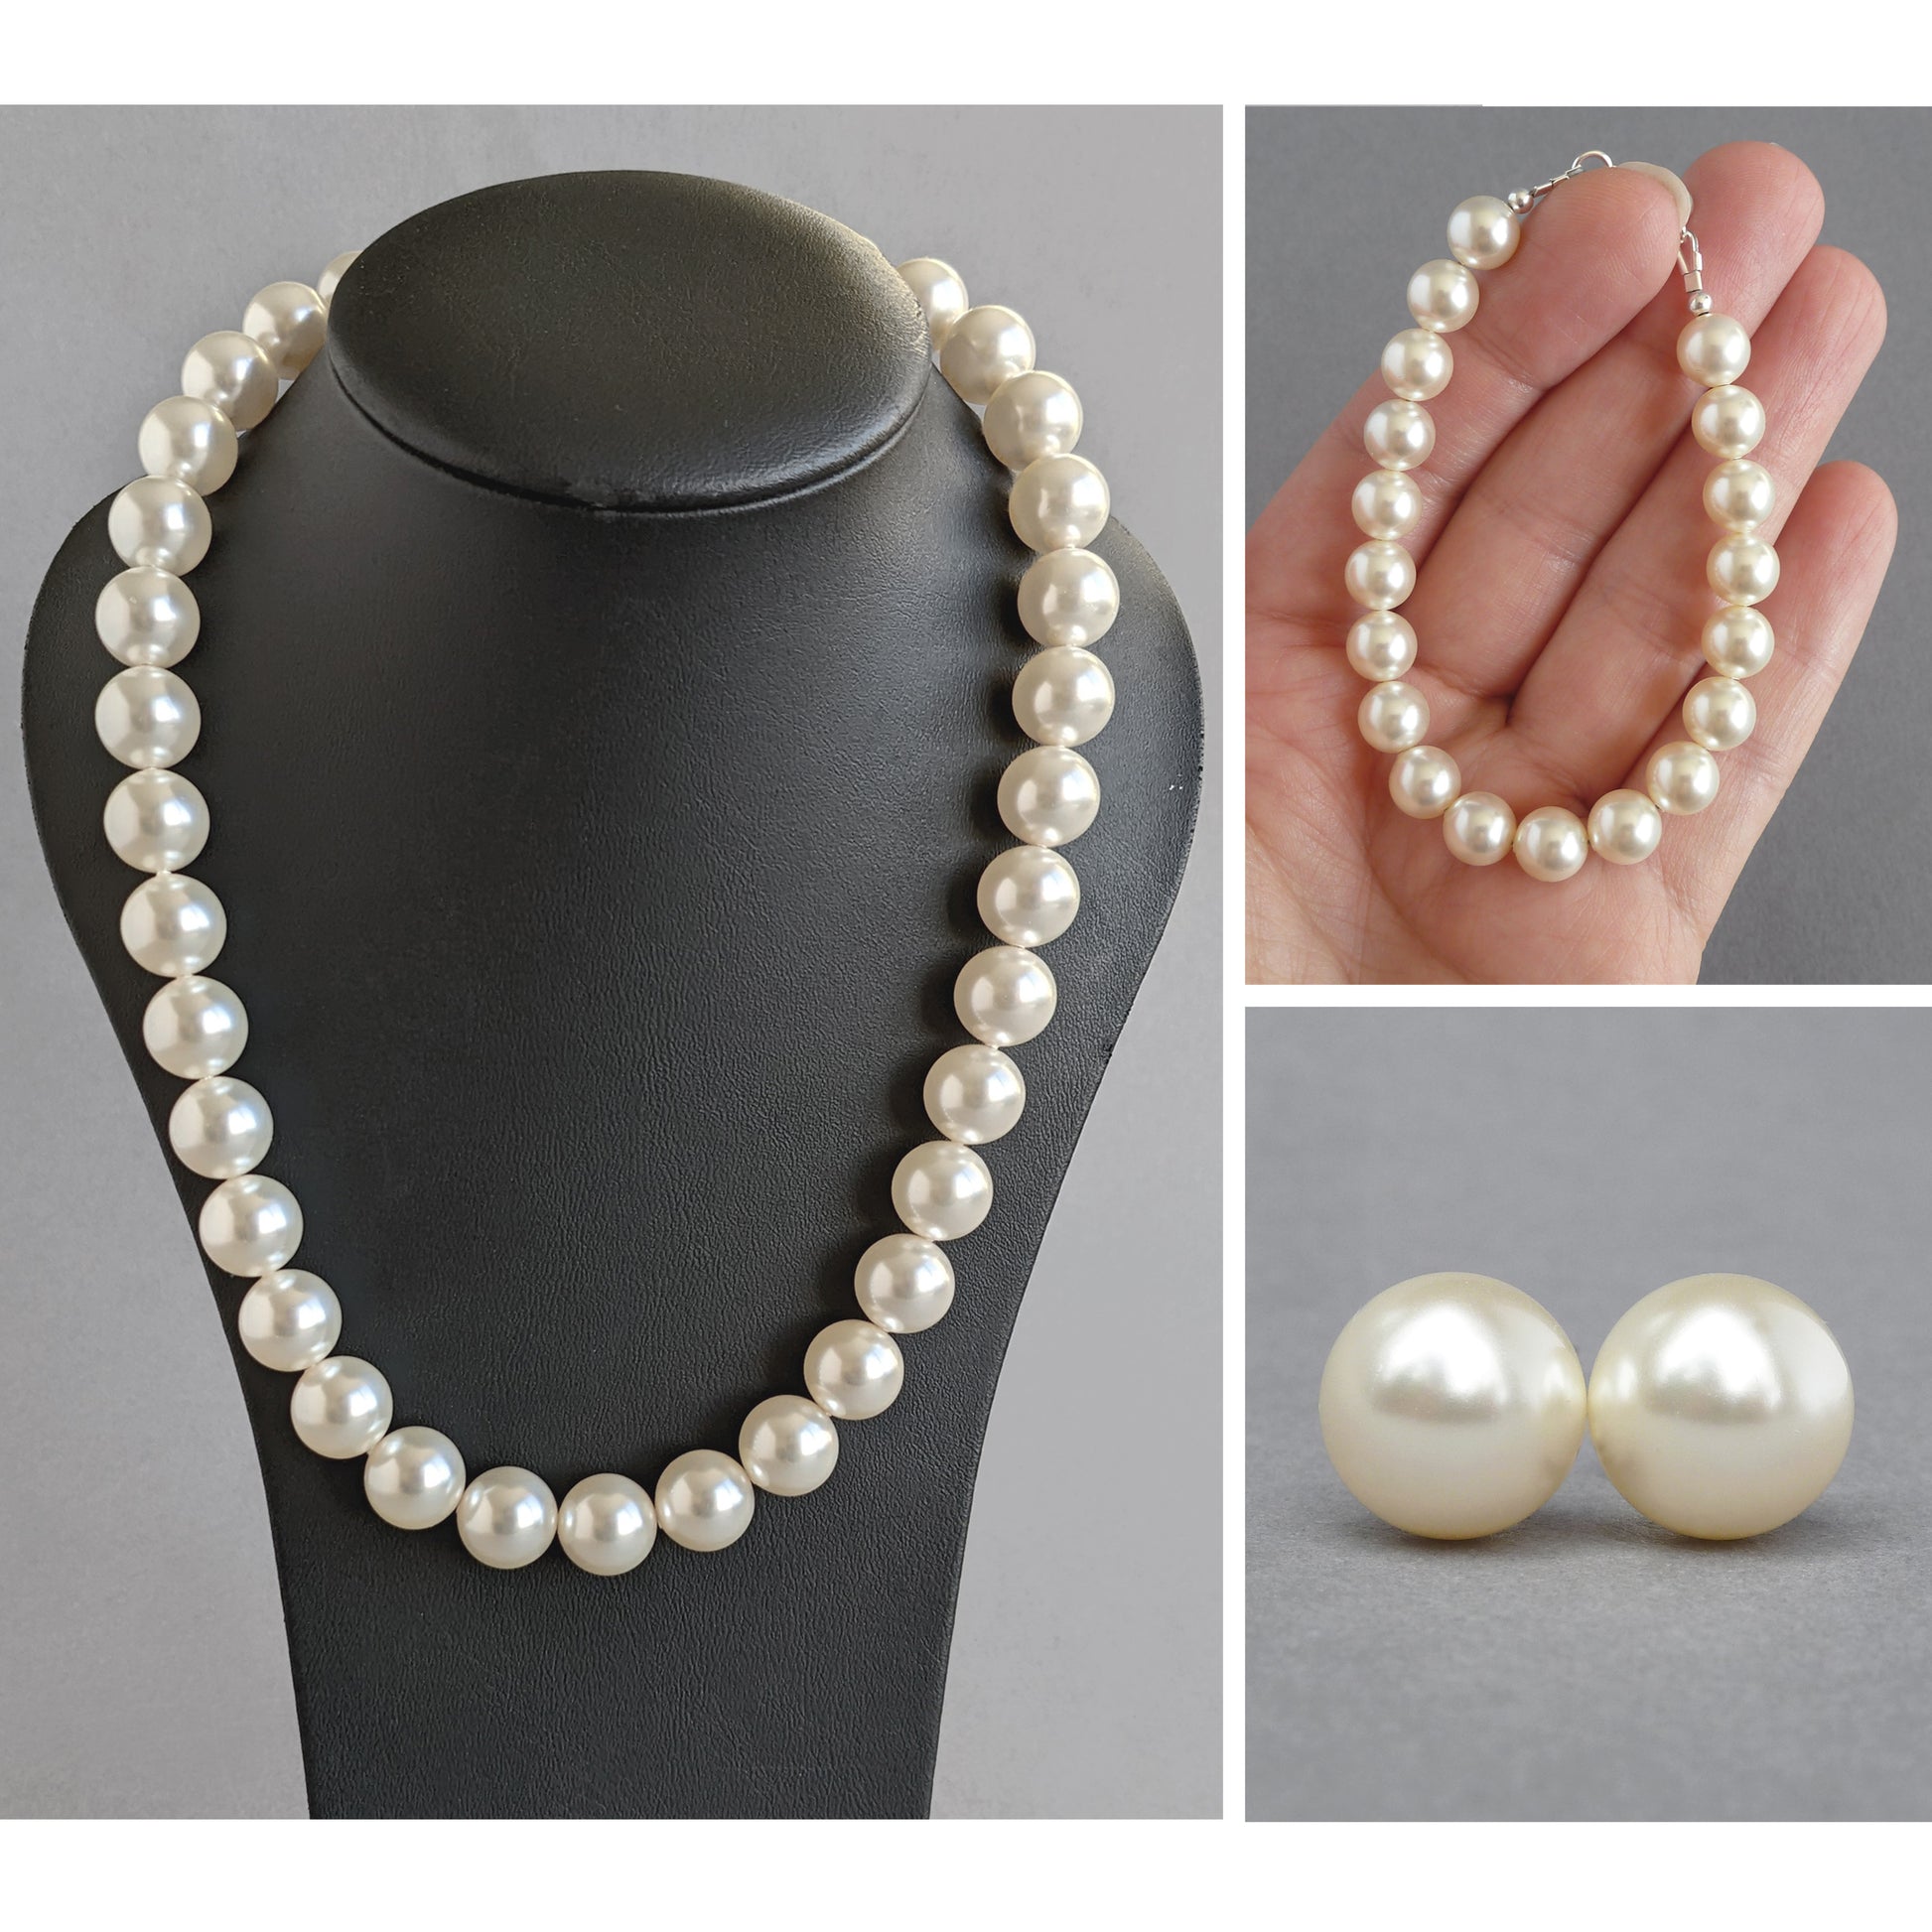 Chunky cream pearl jewellery set - cream single strand necklace, bracelet and  12mm pearl studs